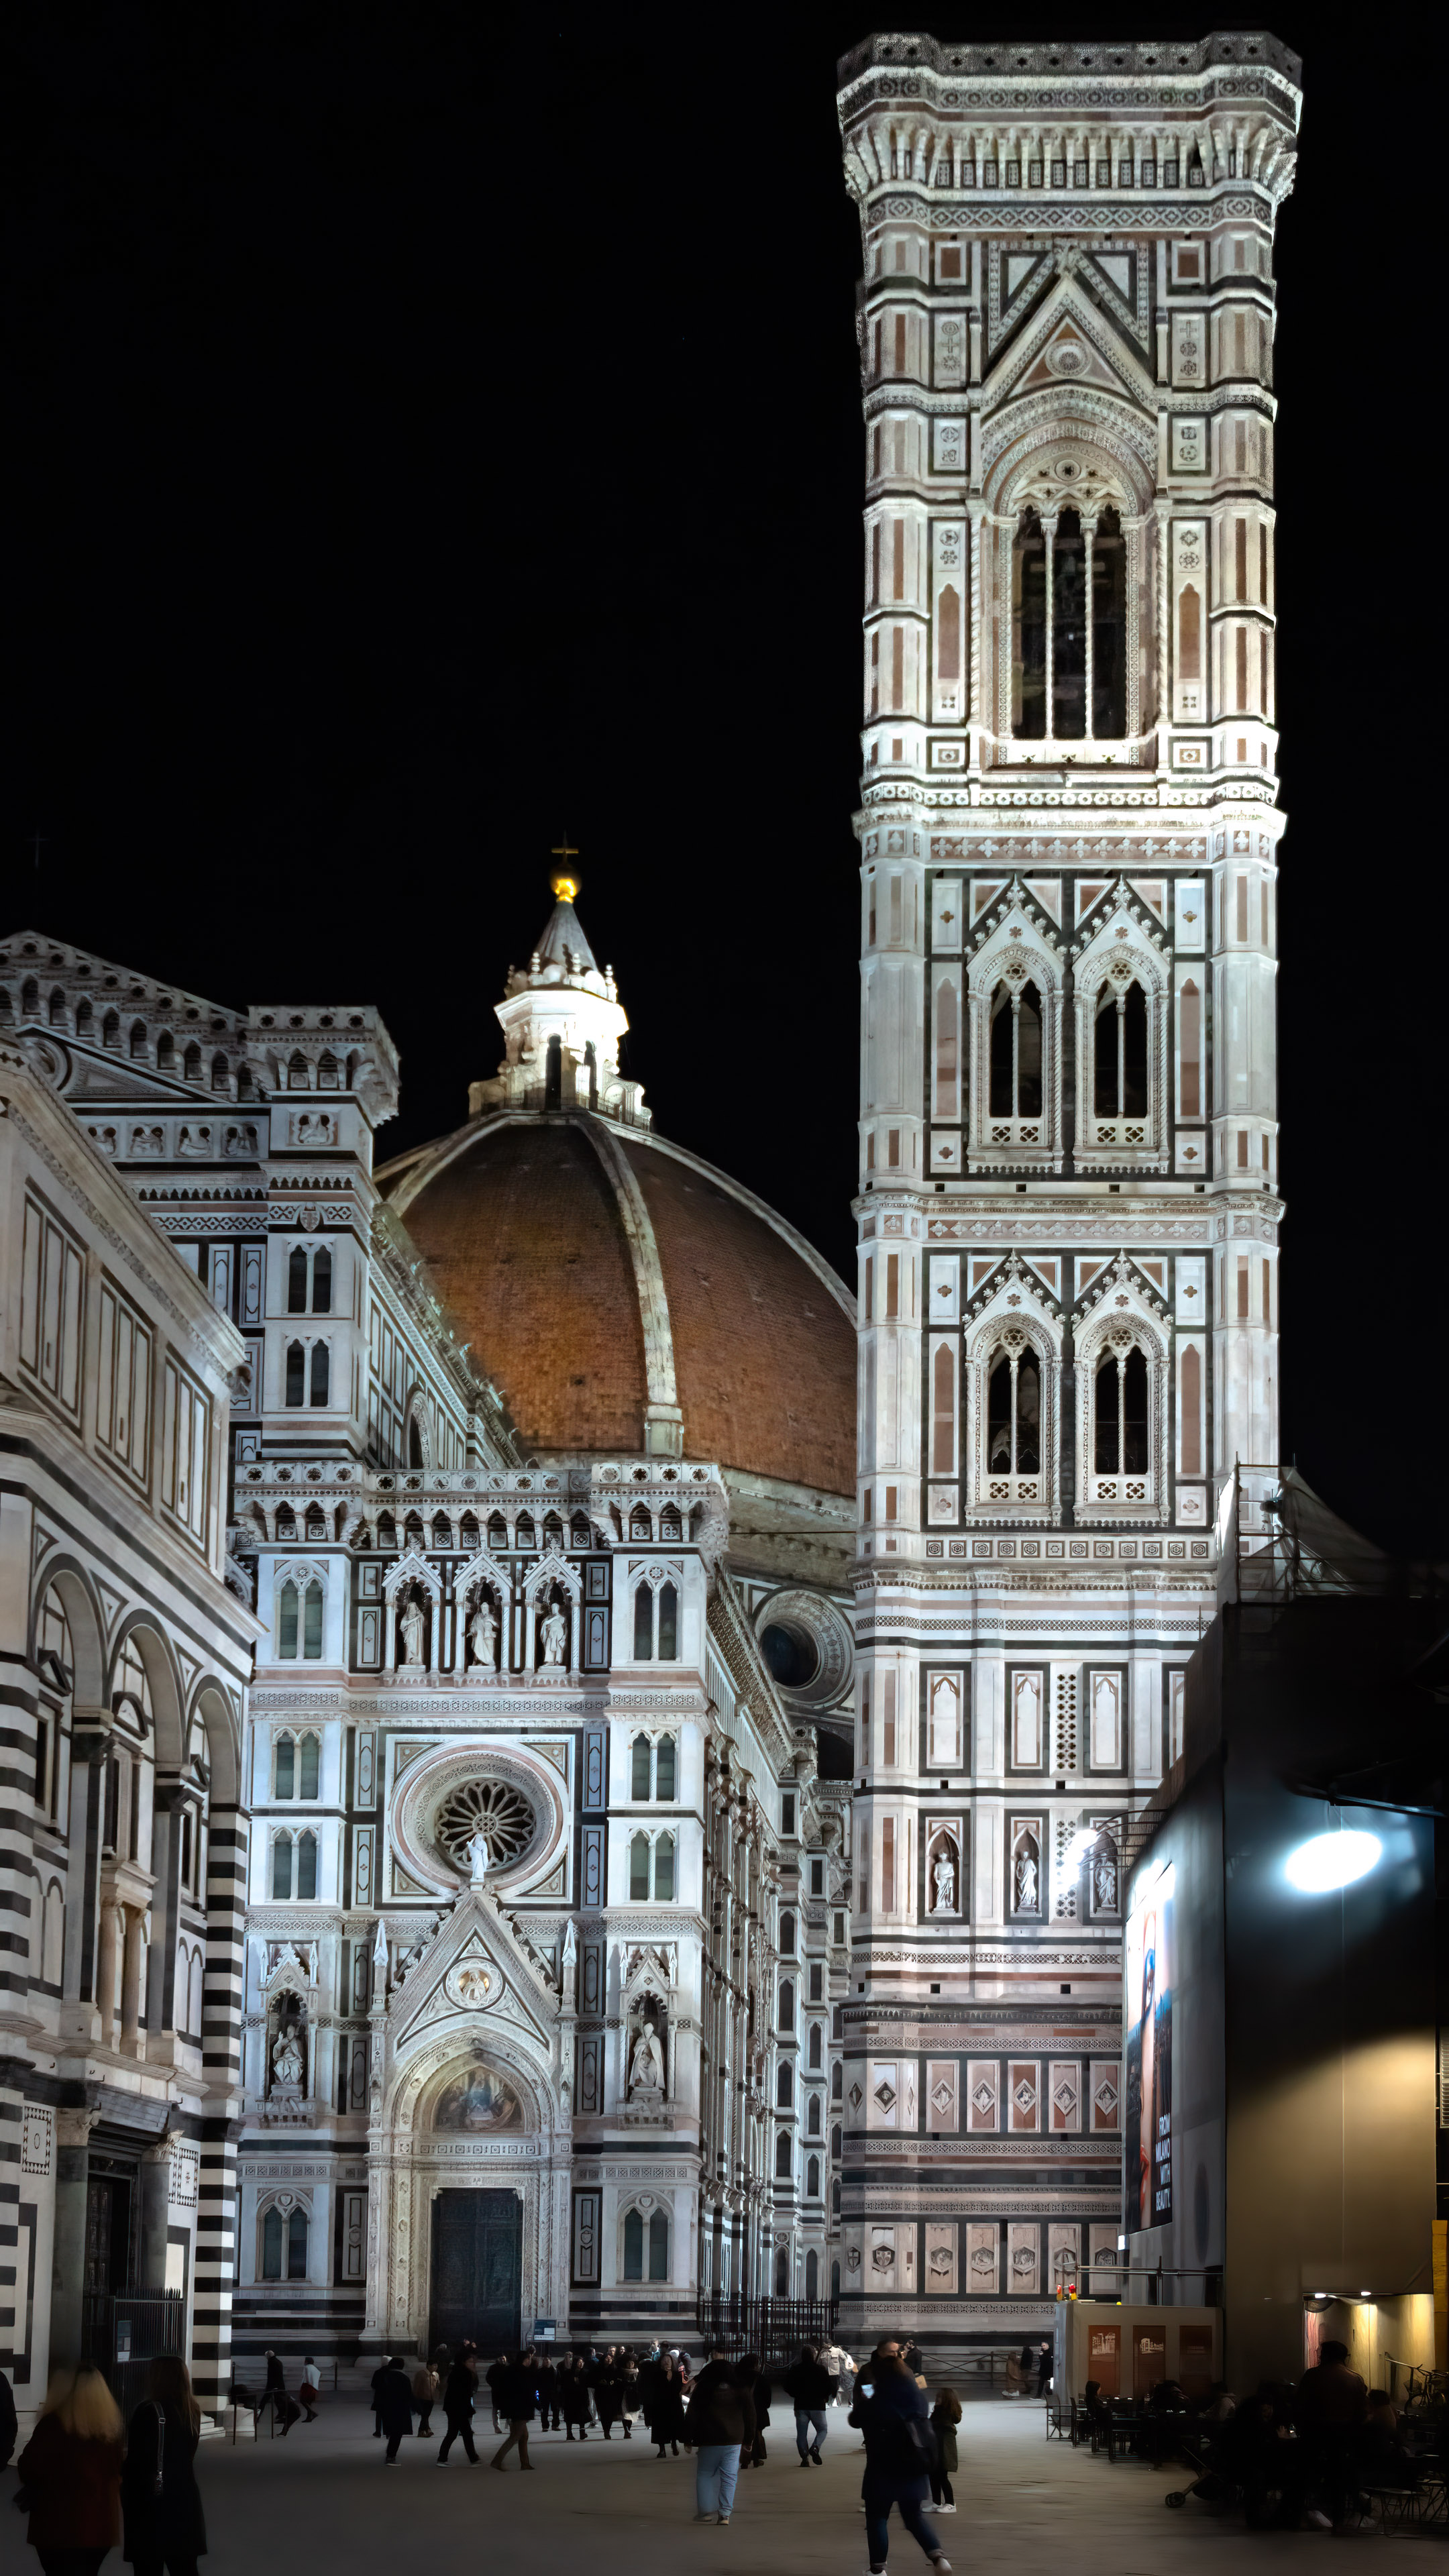 Get lost in the magic of Florence at night with this captivating city lights wallpaper.